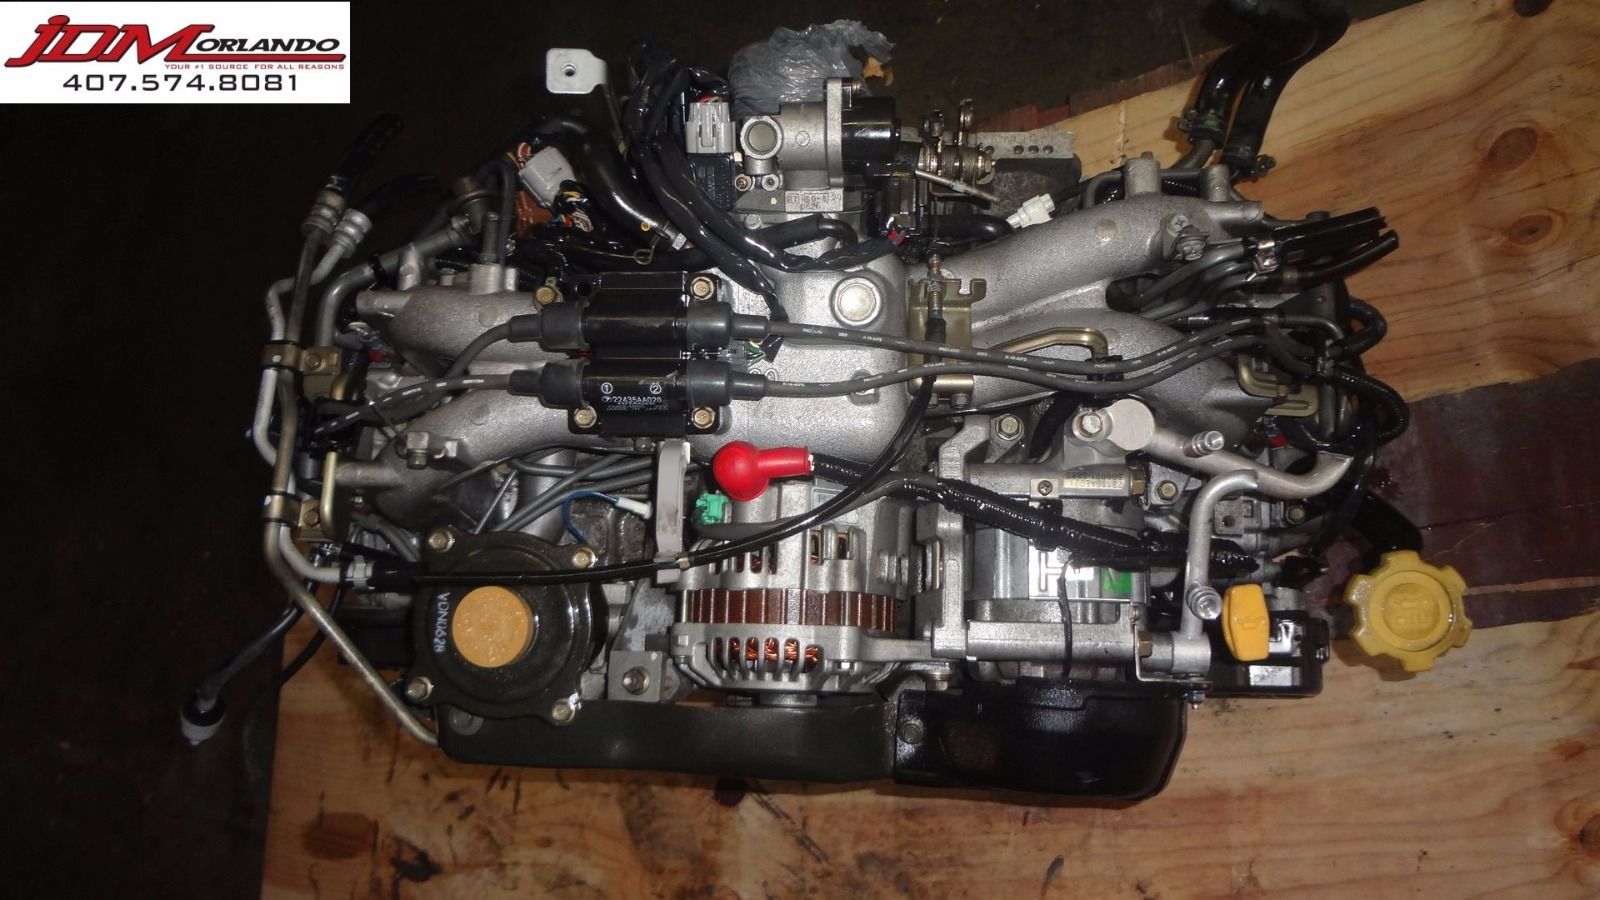 0004 Subaru Forester 2.0l Sohc H4 Replacement Engine JDM